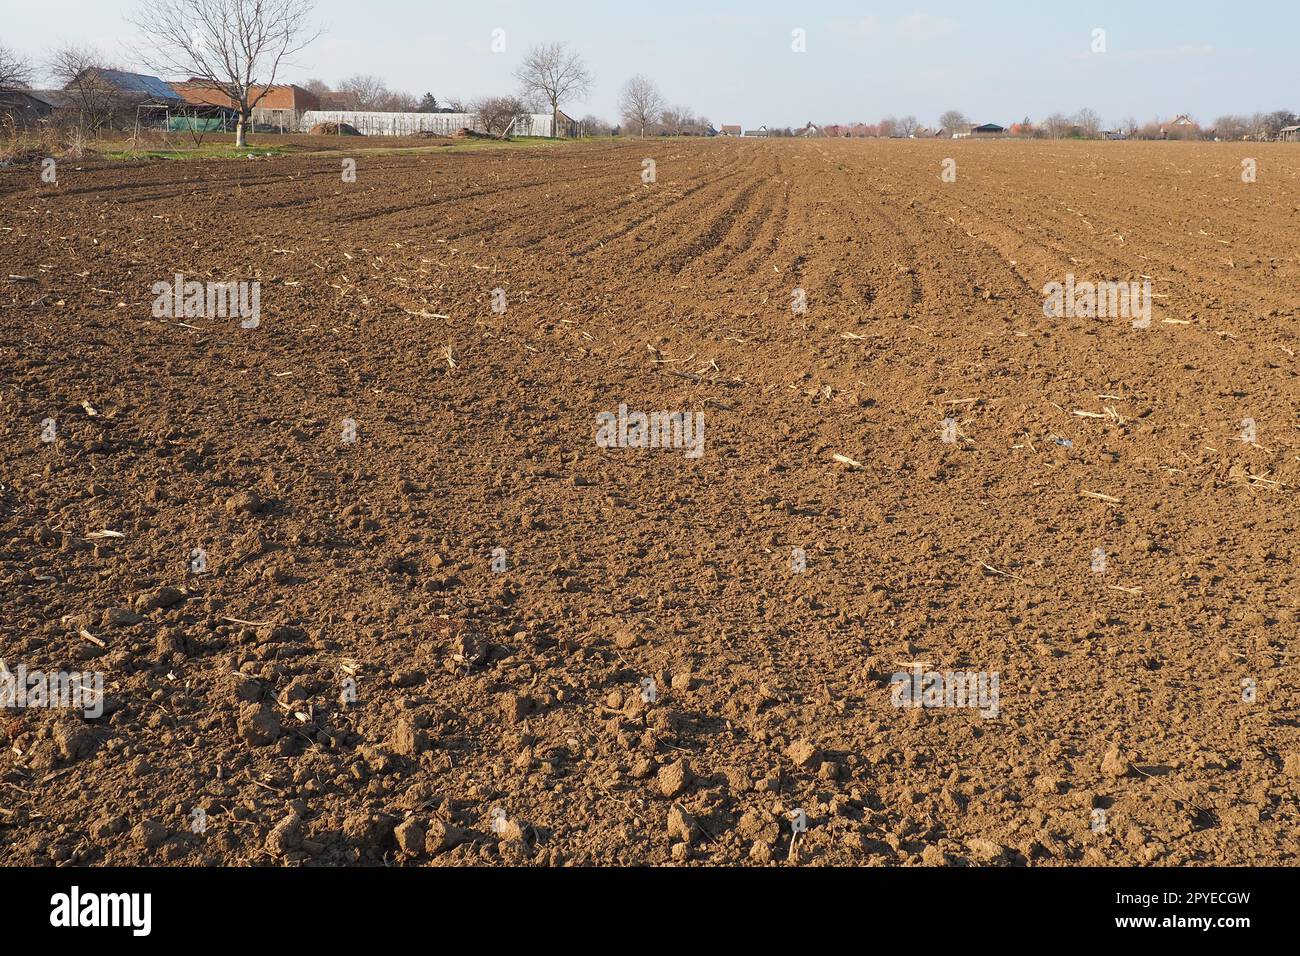 Arable field ready for spring agricultural work. Furrows from the passage of a tractor or combine. Cornmeal on the ground. Fertile soil for planting. Fertilizers are the key to a good harvest. Stock Photo